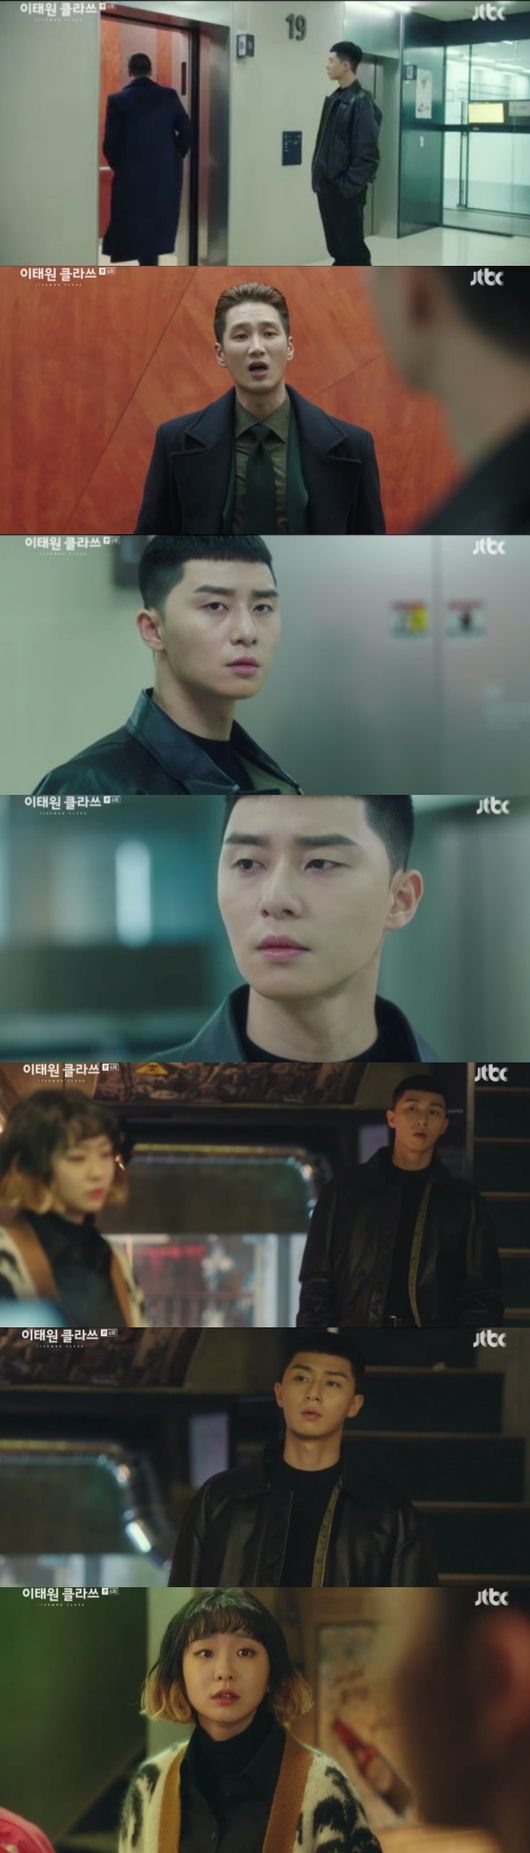 Itaewon Clath Park Seo-joon and Kim Da-mi, An Bo-hyeon and Kwon Nara started a flame competition for success.In the JTBC gilt drama Itaewon Klath (playplay by Gwangjin, directed by Kim Sung-yoon and Kang Min-gu), which aired on the afternoon of the 15th, Joe-yool Lee (Kim Da-mi) directed at Park Sae-ro-yi (Park Seo-joon) was drawn.Park Sae-ro-yi has been in love with Oh Soo-ah (Kwon Nara) since high school, raising questions about how the relationship between the three will change.The Fountainhead (by An Bo-hyun) had Oh Soo-ah in mind for a long time.In fact, Oh Soo-ah grew up in a difficult environment and was abandoned by his parents, so he was eager for success, so he could not accept the heart of Park Sae-ro-yi, who had nothing to have.Her warrior (formerly) was known on the day, and she was abandoned by her mother at a young age and was greatly hurt by her friends compassion when she was in high school.She said, You have done your best in your life.I went to kiss Park Sae-ro-yi, saying, You are too bright for me in fact. I was drunk and my heart was weakened.But Joe-yool Lee, who was watching them from the side, blocked SuAs mouth with his palm.Unconsented kissing is a forced molestation. Seo-yool Lee also walked his life in the charm of the new Roy.What are you doing? said Park Sae-ro-yi, who asked, Do you agree with this kiss, boss? Other employees are waiting now.Is it okay to wait for this after the first dinner after the business resumption?Joe-yool Lee asked Oh Soo-ah, Wheres your house, sister? Ill call you a taxi.But SuA said, Can I join the party? Joe-yol Lee said, Get in.The Park Sae-ro-yi between the two women was troubled by what to do: Oh Soo-ah, who eventually attended the party at the single-night party.In the midst of the awkward atmosphere, Oh Soo-ah showed a closeness to Jang Geun-soo (Kim Dong-hee), the half-brother of The Fountainhead, who had not known that they were brothers until this time.She said, I think I saw it somewhere, but Jang Geun-soo mentioned the police station case.A few days later, Oh Soo-ah learned that Jang Geun-soo was his second son through a family photo lying on the desk of Chairman Jang Dae-hee (Yoo Jae-myung).She reported that Jang Geun-soo was working at night.In the meantime, Oh Soo-ah was wary of hearing Park Sae-ro-yis goals.At the dinner party, Joe-yool Lee praised the five stars, saying, Foa is the best in Itaewon. In her words, Park Sae-ro-yi said, My goal is to franchise the night.I didnt think it would be easy, because I said with confidence that I could do it alone, but you could do it. Oh Soo-ahs expression hardened.Joe-yool Lee and Oh Soo-ah who met in the bathroom.Joe-yool Lee told Oh Soo-ah, I like Park Sae-ro-yi very much.I went to a psychiatric clinic in junior high school and the doctor said, Sociopathism is 79 percent. So I have to have what I want.If anyone is disturbed, it will be destroyed. He said, I like you.What do you do? Joe said confidently, without Oh Soo-ah, Roy likes me, but Joe-yol Lee said, Then I cant help it. Im going to break my sister.Joe-yool Lee said, Try. He said, Try.Meanwhile, Joe-yool Lee was caught by her mother (Kim Yeo-jin) that she did not register for admission even though she passed college and was working at a single night.Why dont you go to college and do that? she said, angry, but Joe-yol Lee said, The person you like is the boss.Her life goal was to make it a success without going to college and to get a single night and Park Sae-ro-yi.On the other hand, Danbam was short of hand and decided to pick another part-time student. From Joe-yool Lees fans, people of various ages visited the store as applicants.The foreigner came to the scene at night and was surprised by everyone, who said, I am Korean, my father is Korean. He eventually passed the new job.In the meantime, Chairman Chang was wary of the growth of the night and thought, Park Sae-ro-yi is curiously concerned.Joe-yool Lee, who had a wide network, contacted PD and won the broadcast, and Park Sae-ro-yi admired her ability and praised her for good.The two men were in sync with the rising year for the single-night franchise.Oh Soo-ah told Park Sae-ro-yi, Thank you so much for that, do not really like me anymore. I decided to live faithfully in my life.I have lived as a long-term person, and I will continue to do so. The Fountainhead, who watched this, once again felt qualified for Park Sae-ro-yi.Chang told his older son, I am not wary of Park Sae-ro-yi, but I am a measurer to see if Oh Soo-ah is my person.He then promised his son that if he brought Oh Soo-ah as his wife, he would no longer make a confrontation.On the other hand, Park Sae-ro-yis Sanbam and Jean The Fountainheads Janga Foa met against the comparison.But Jeans Funtainhead jersey prevented him from appearing on the air, and Park Sae-ro-yi burned another fight.Park Sae-ro-yi once again Confessions his heart to Oh Soo-ah: that he must beat Janga to make her feel comfortable.He has become a big shareholder by investing 1.9 billion won in the market, and Chang has visited Park Sae-ro-yi at night.It was the day when the competition between the two began in earnest.Itaewon Klath captures broadcast screen